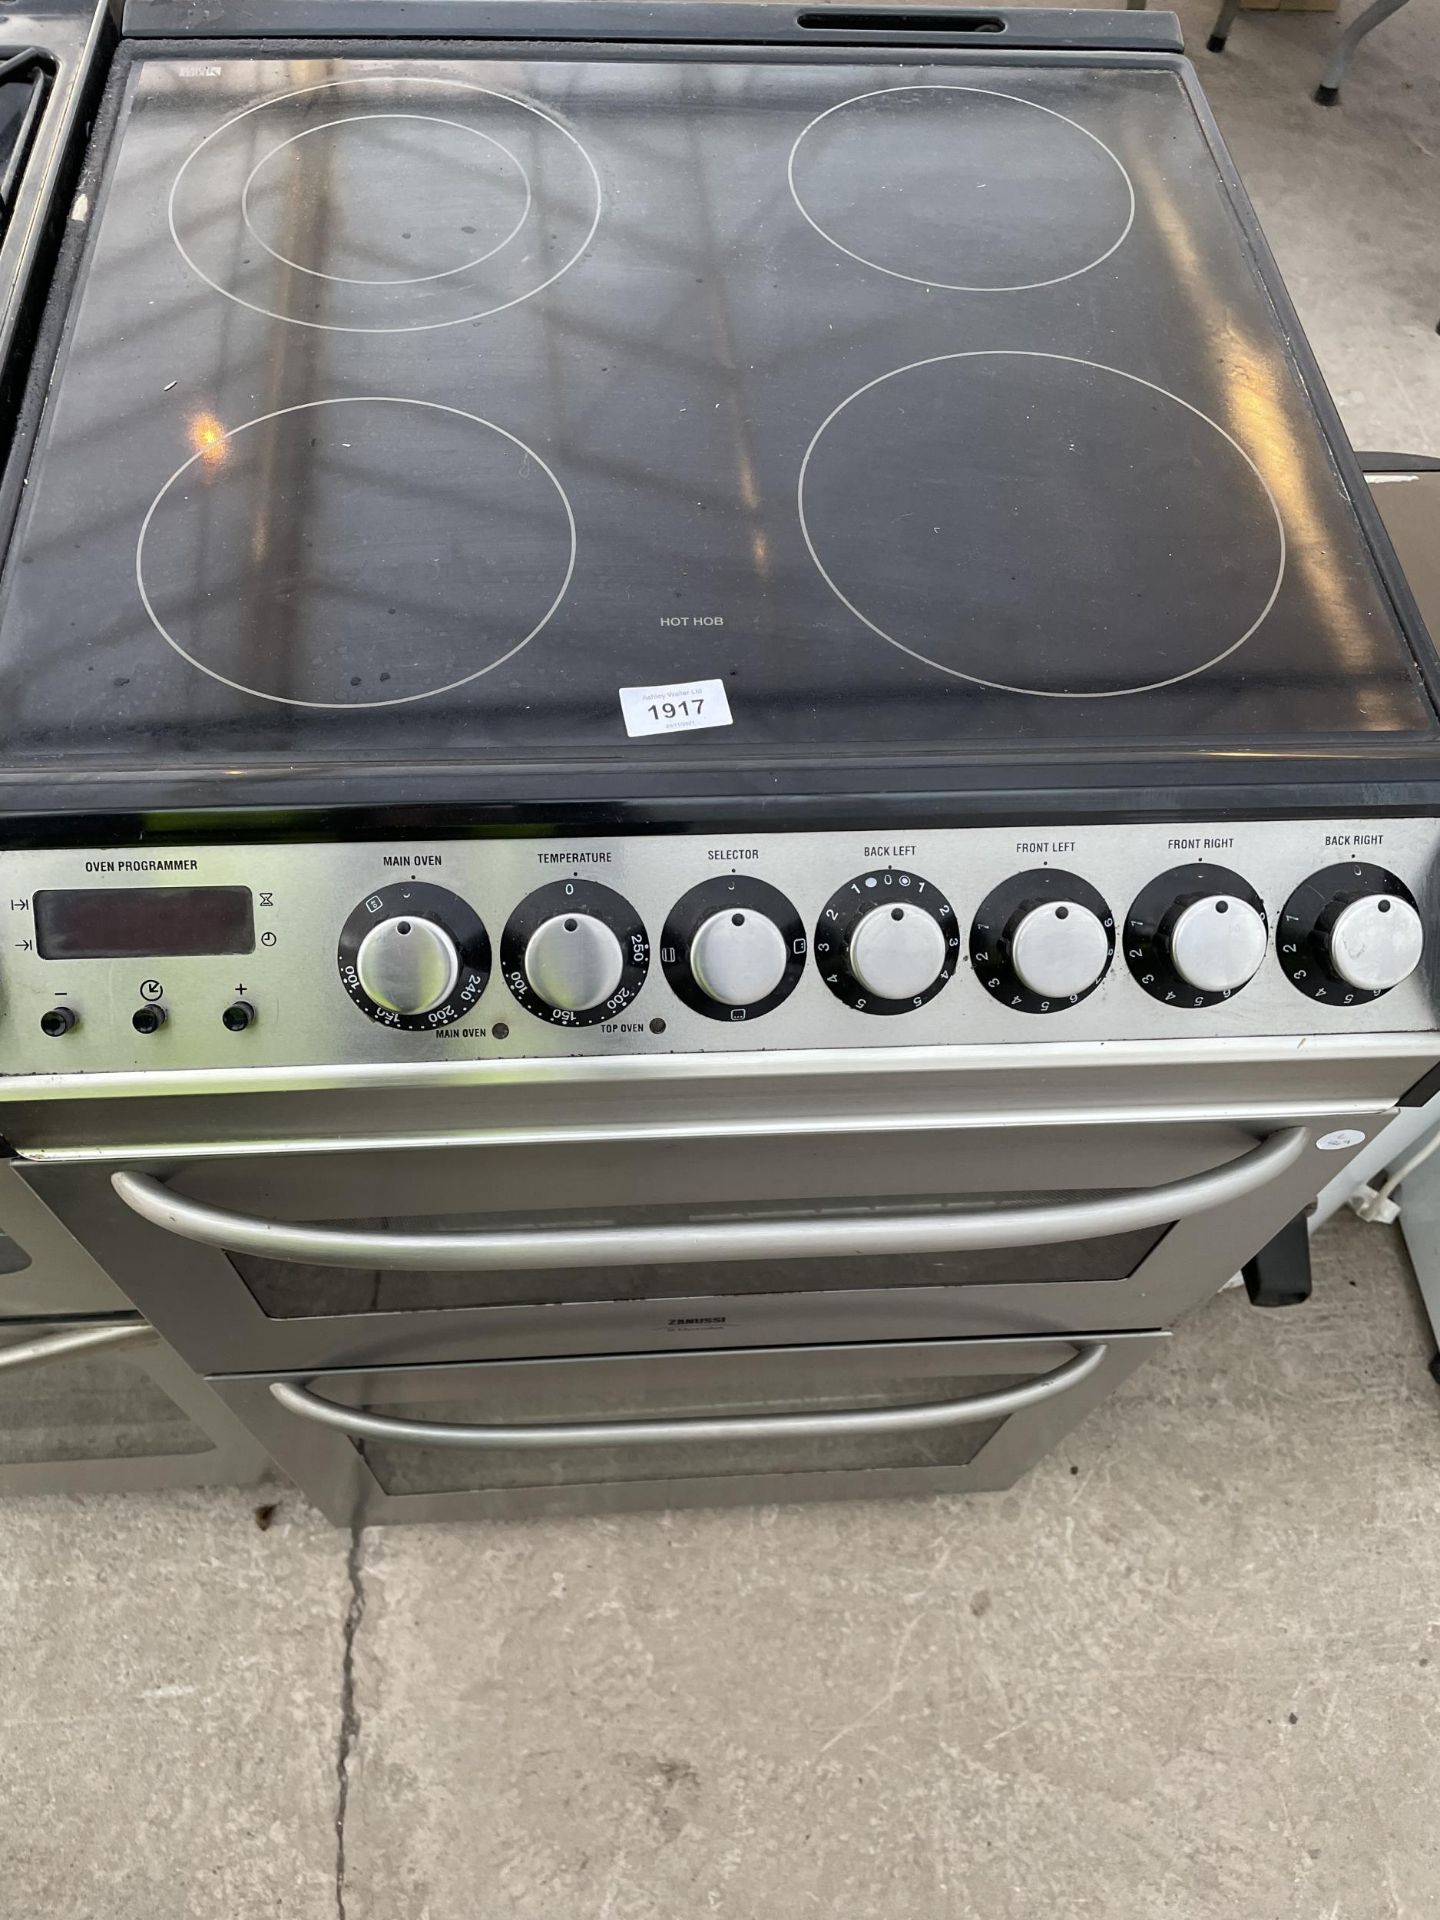 A SILVER ZANUSSI FREESTANDING ELECTRIC OVEN AND HOB - Image 3 of 3